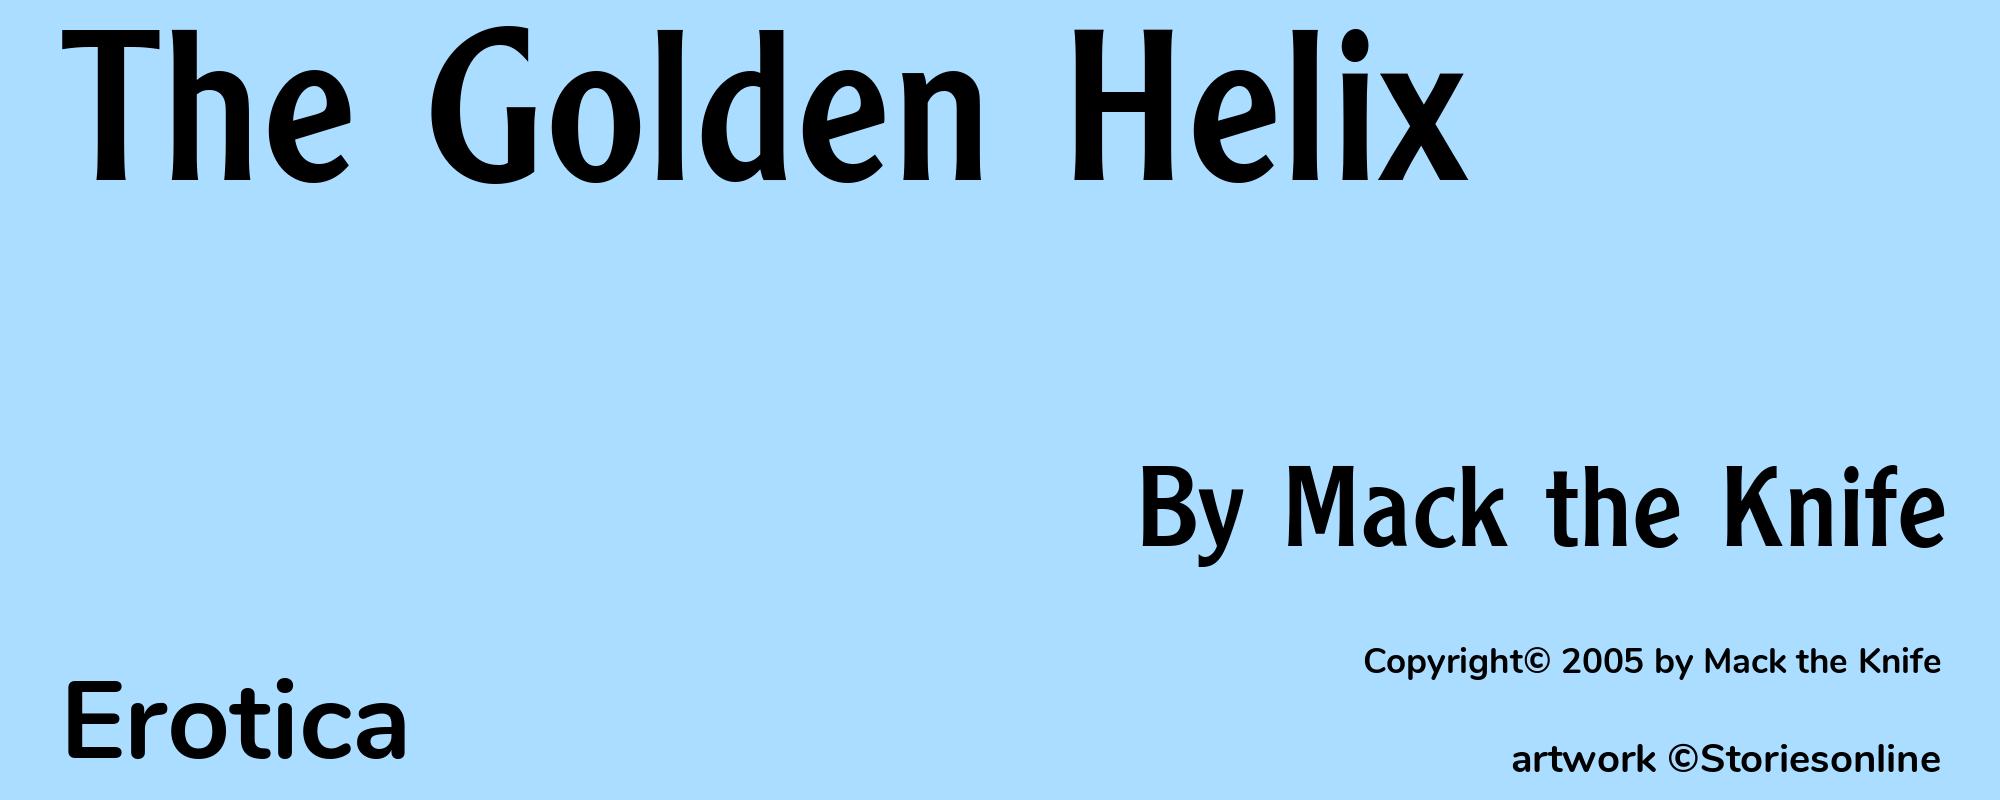 The Golden Helix - Cover